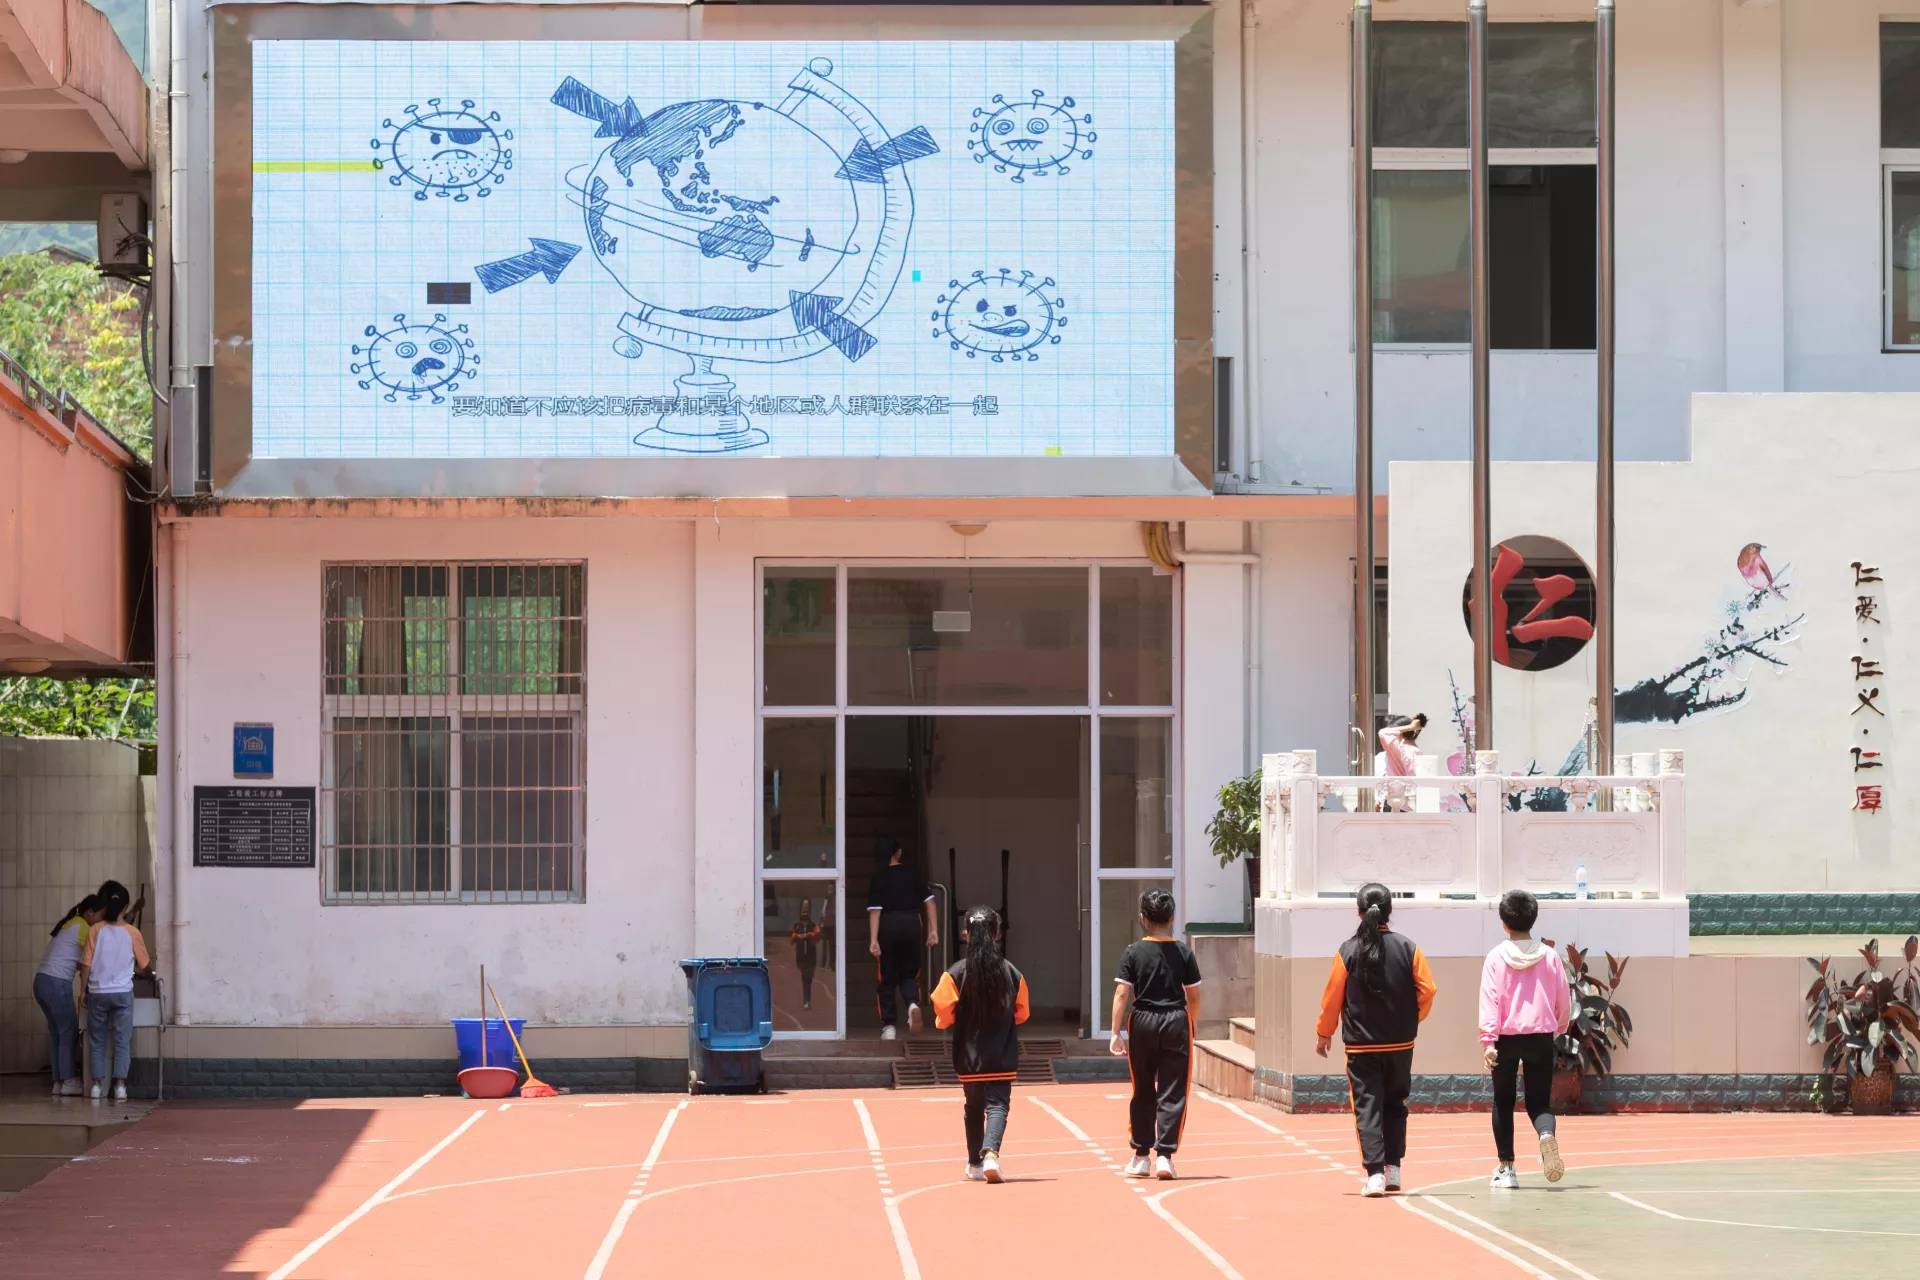 A video on tips for returning to school, produced by UNICEF, China’s Ministry of Education and the Chinese Center for Disease Control and Prevention, was played at Yixing School of Zhong County in Chongqing, China on 3 June 2020.